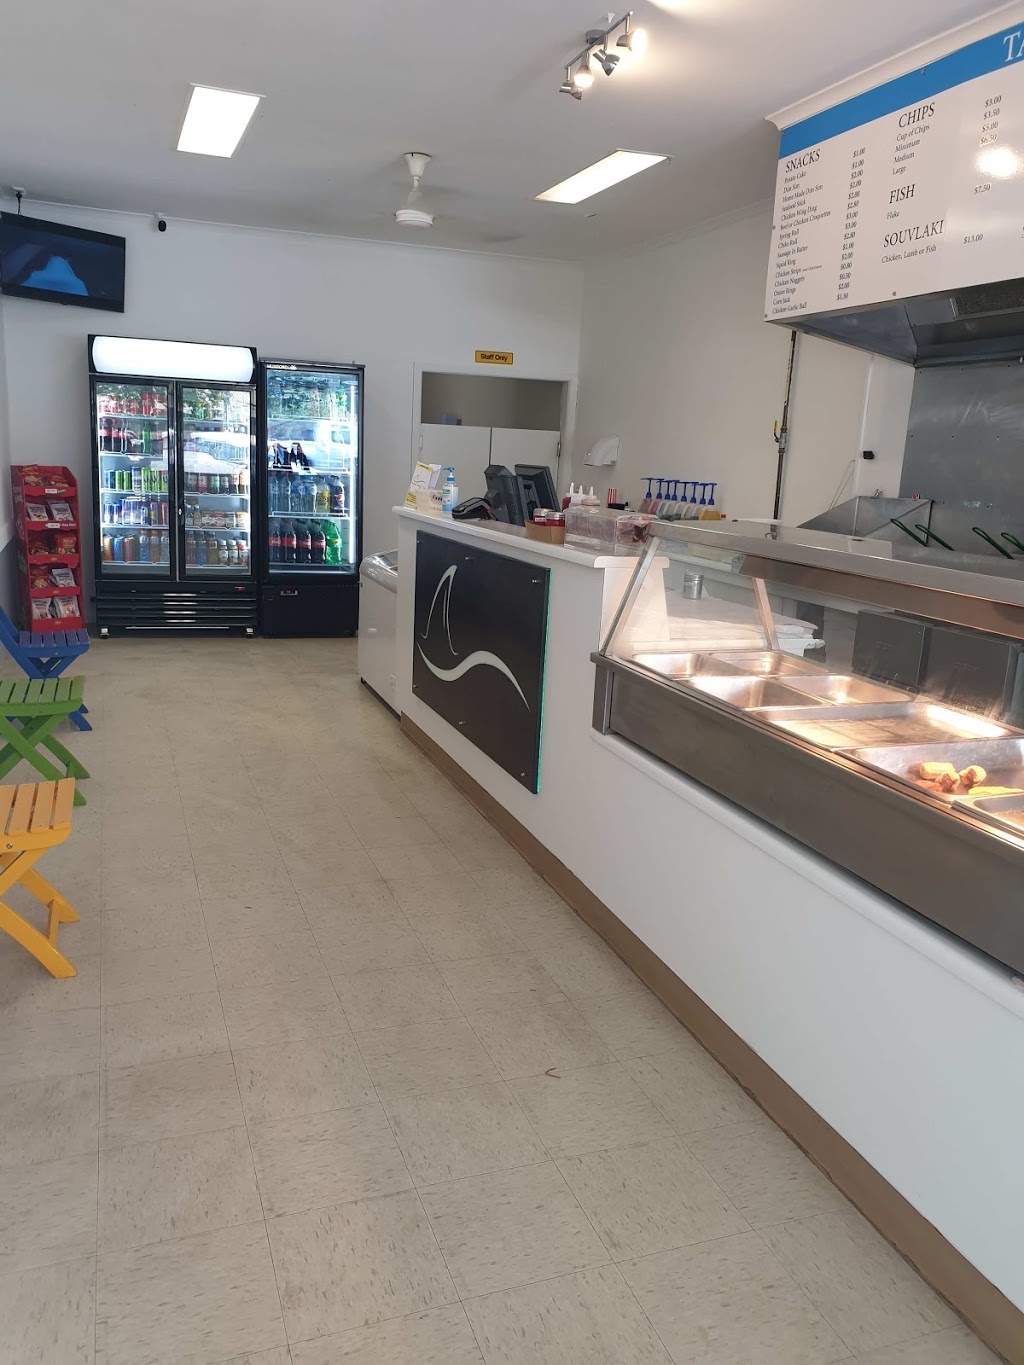 Yarram Fish and Chips | meal takeaway | 282 Commercial Rd, Yarram VIC 3971, Australia | 0351876607 OR +61 3 5187 6607